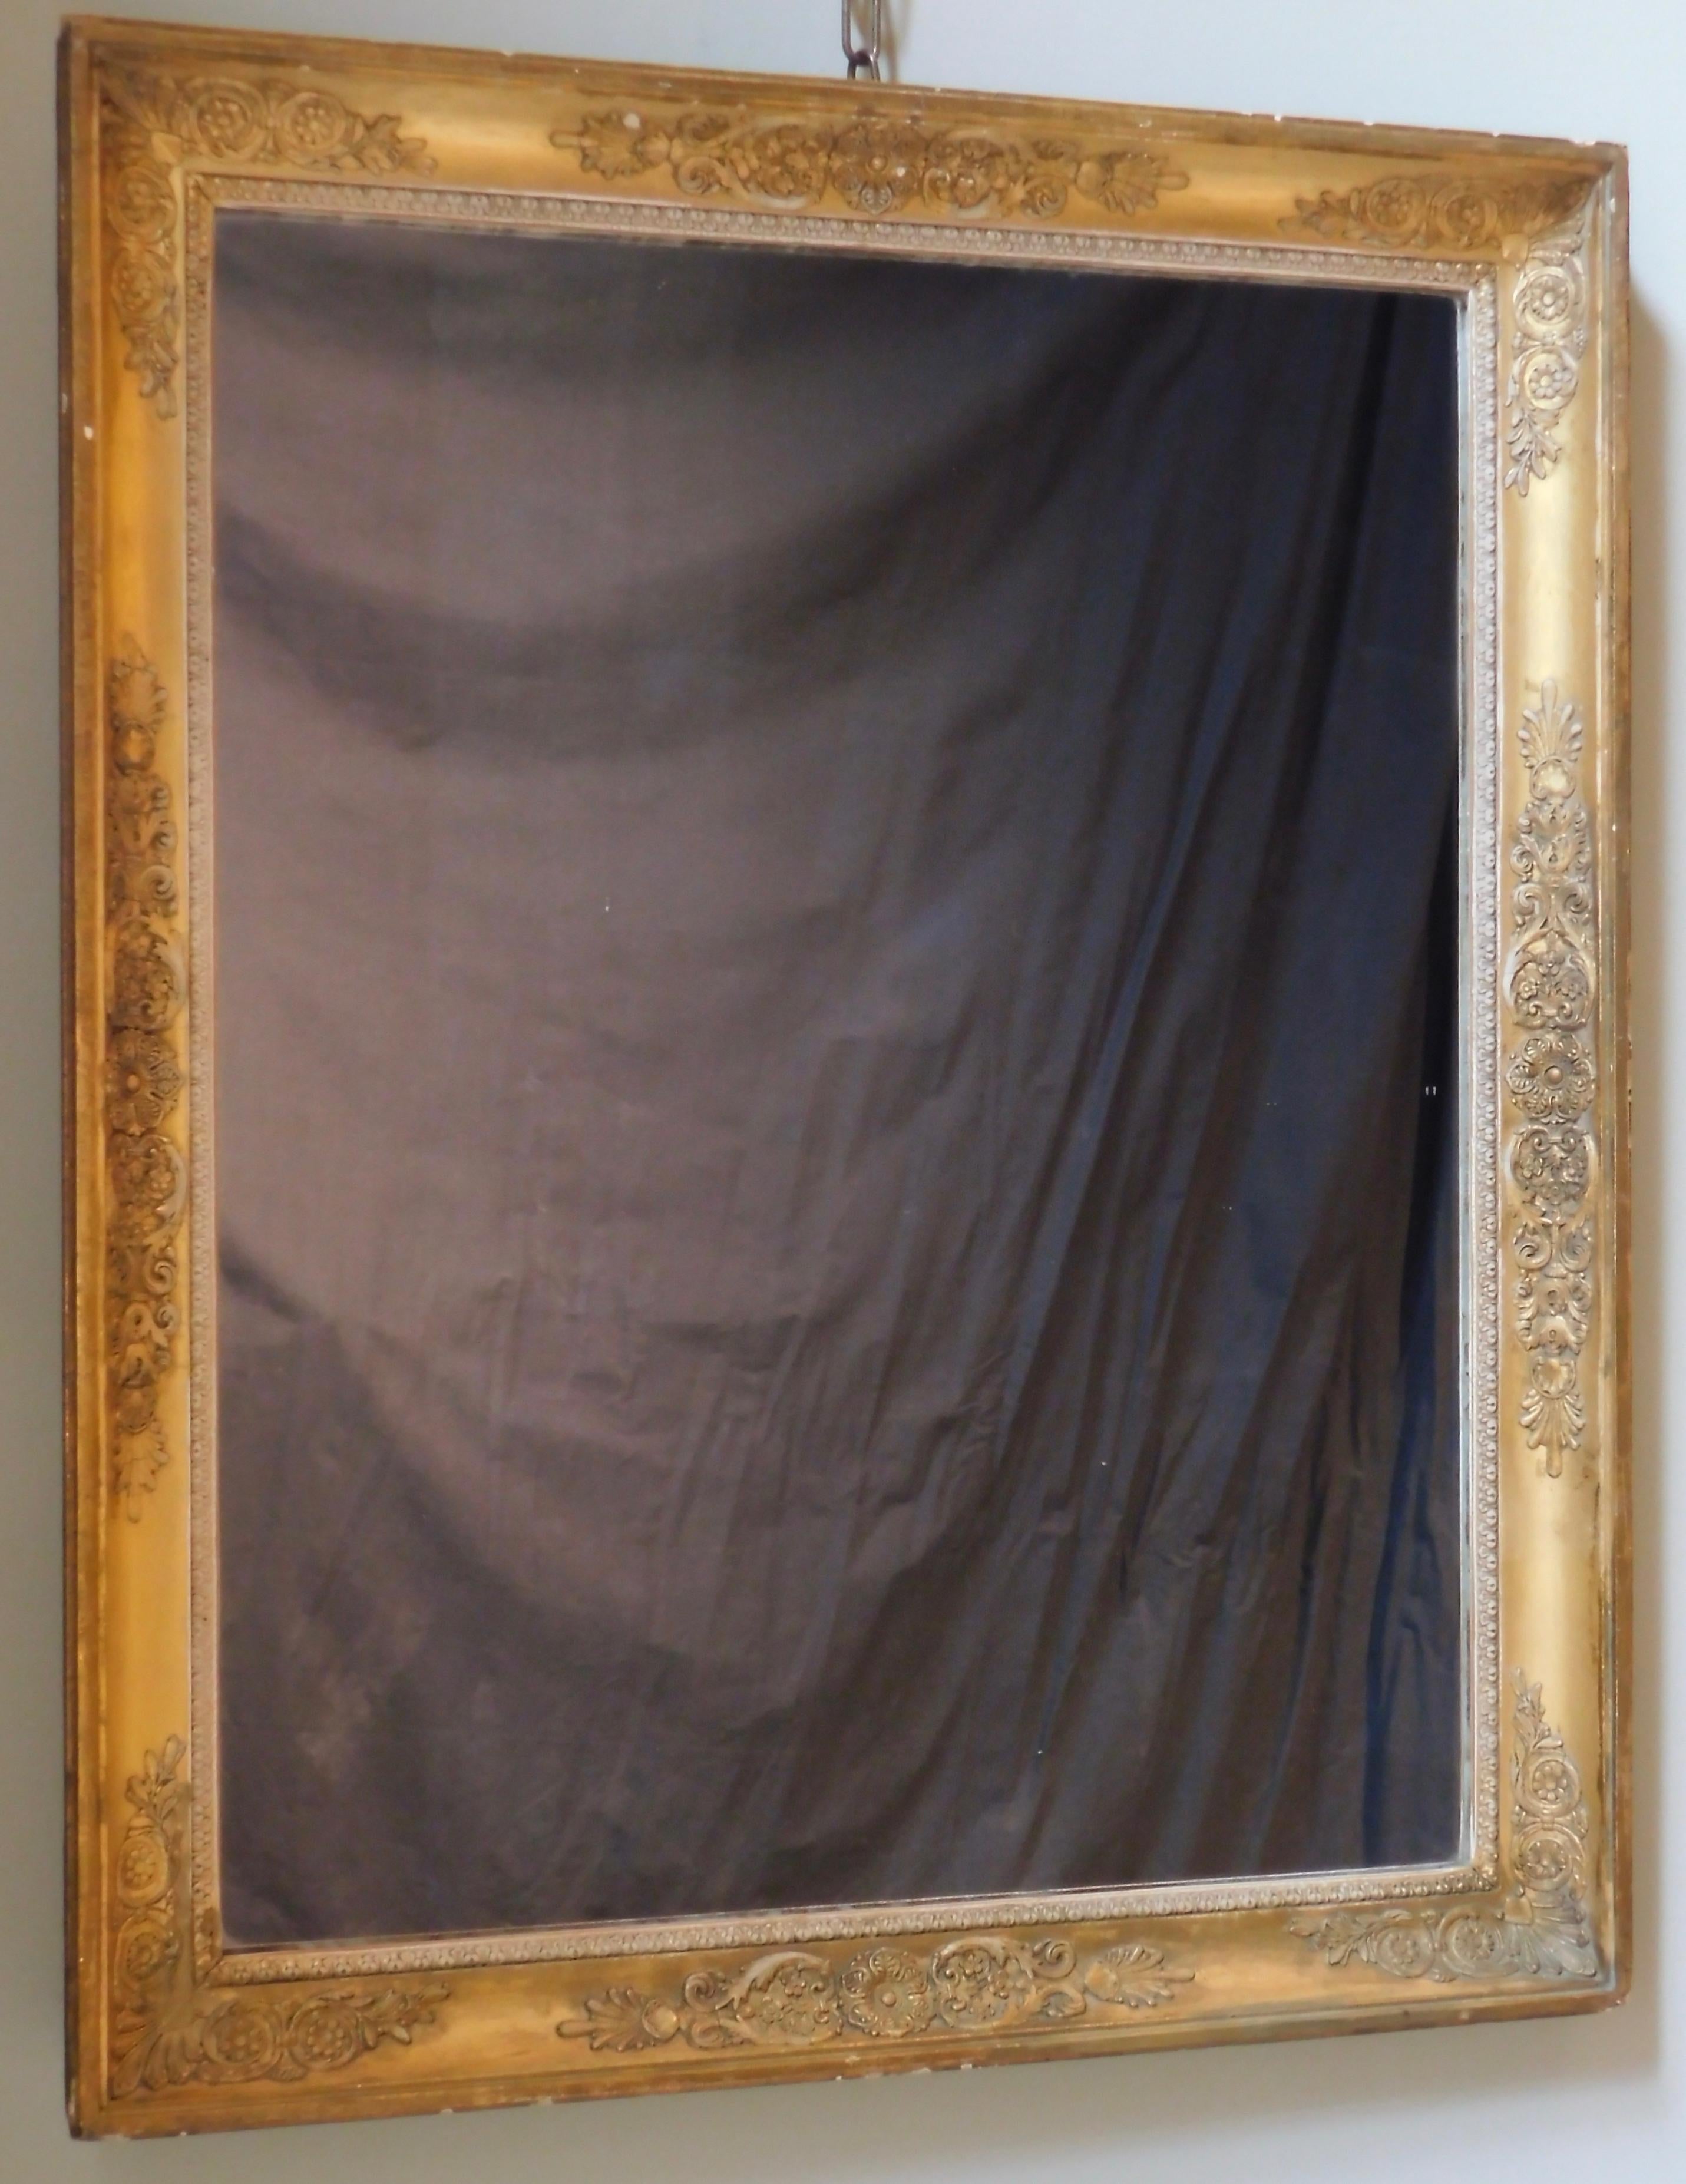 19th century French empire mirror of carved wood and gesso. Gilt and painted. This mirror can be hung vertically or horizontally and would be an excellent choice to use in a bathroom or small entry. The glass is quite heavy and is from the late 20th